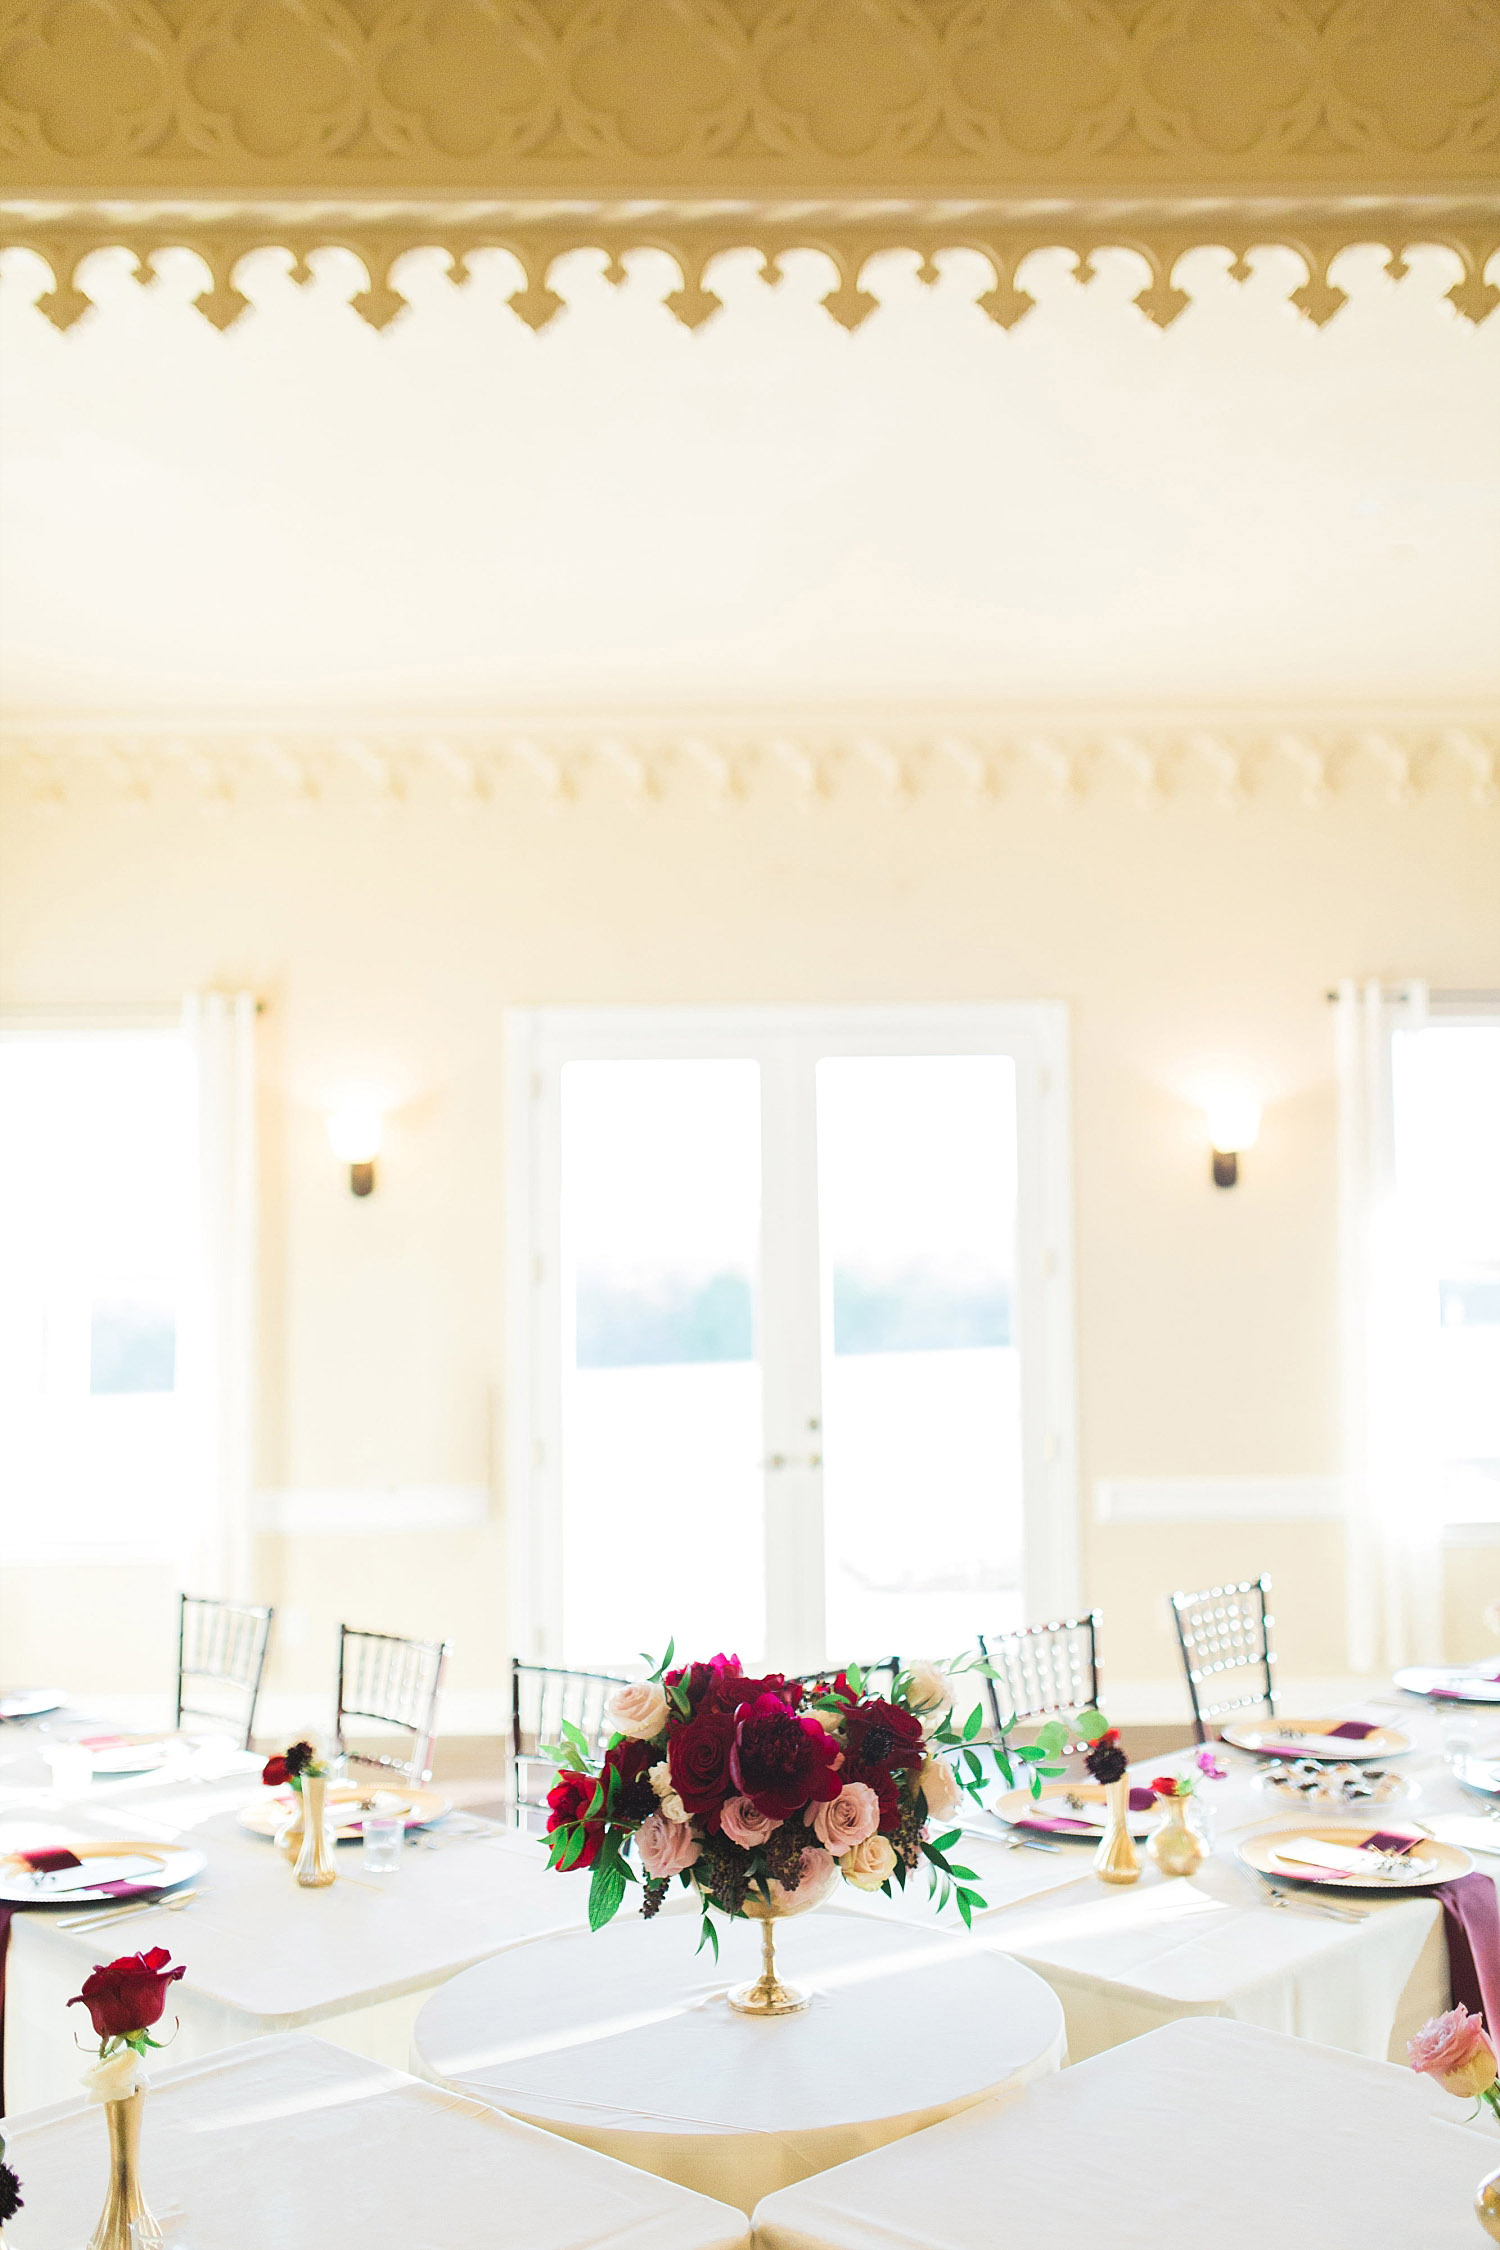 Castle at Rockwall wedding banquet room with red flowers